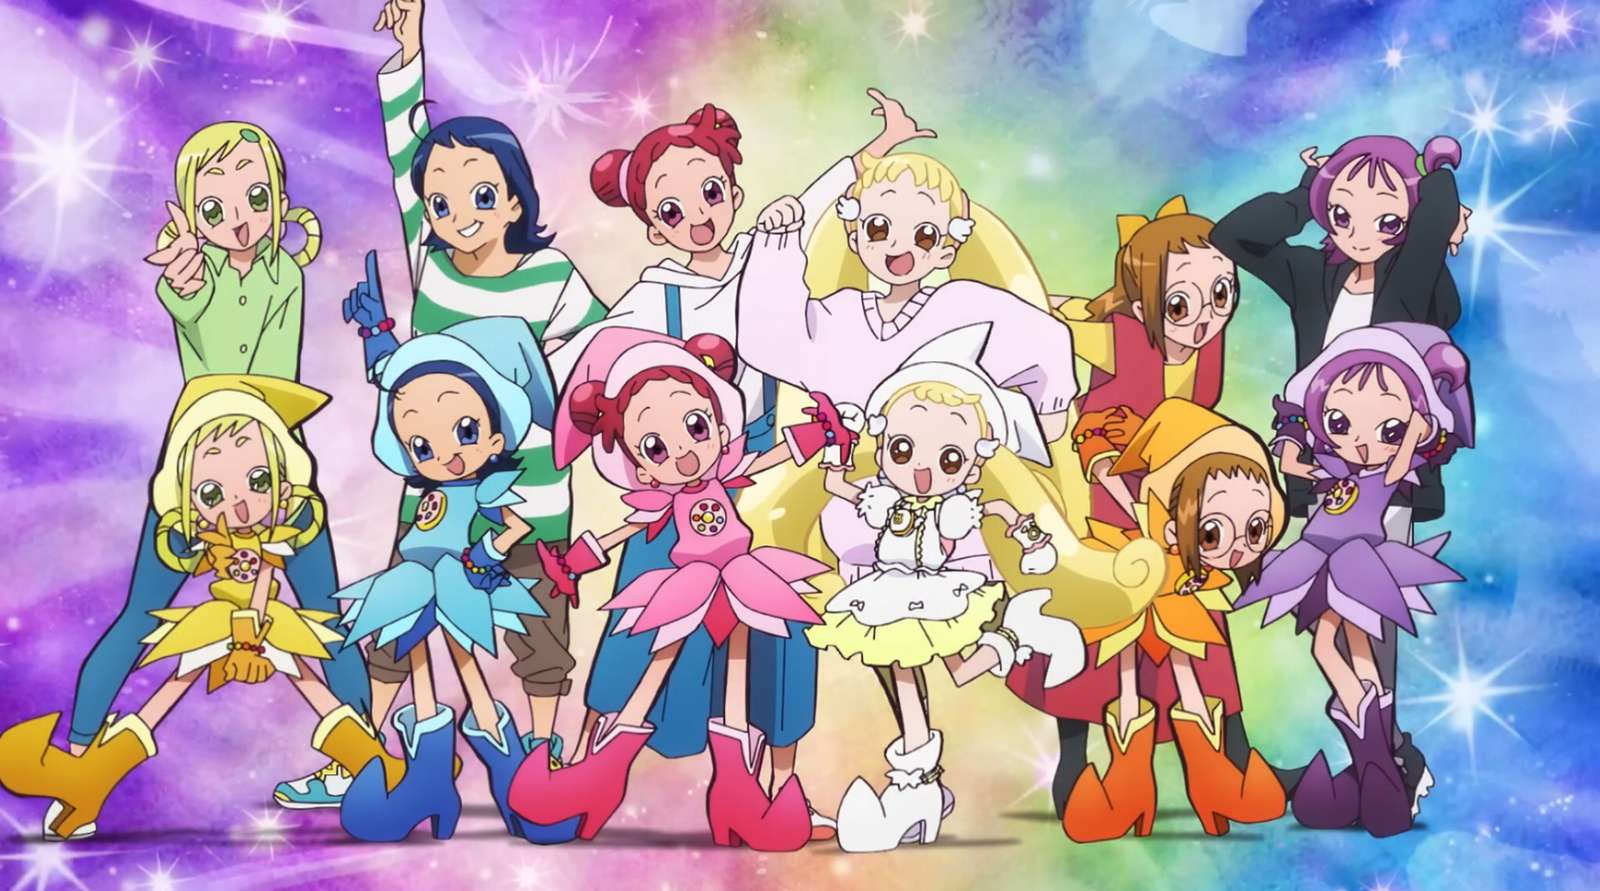 Magical Doremi: The 25th Anniversary! online puzzle